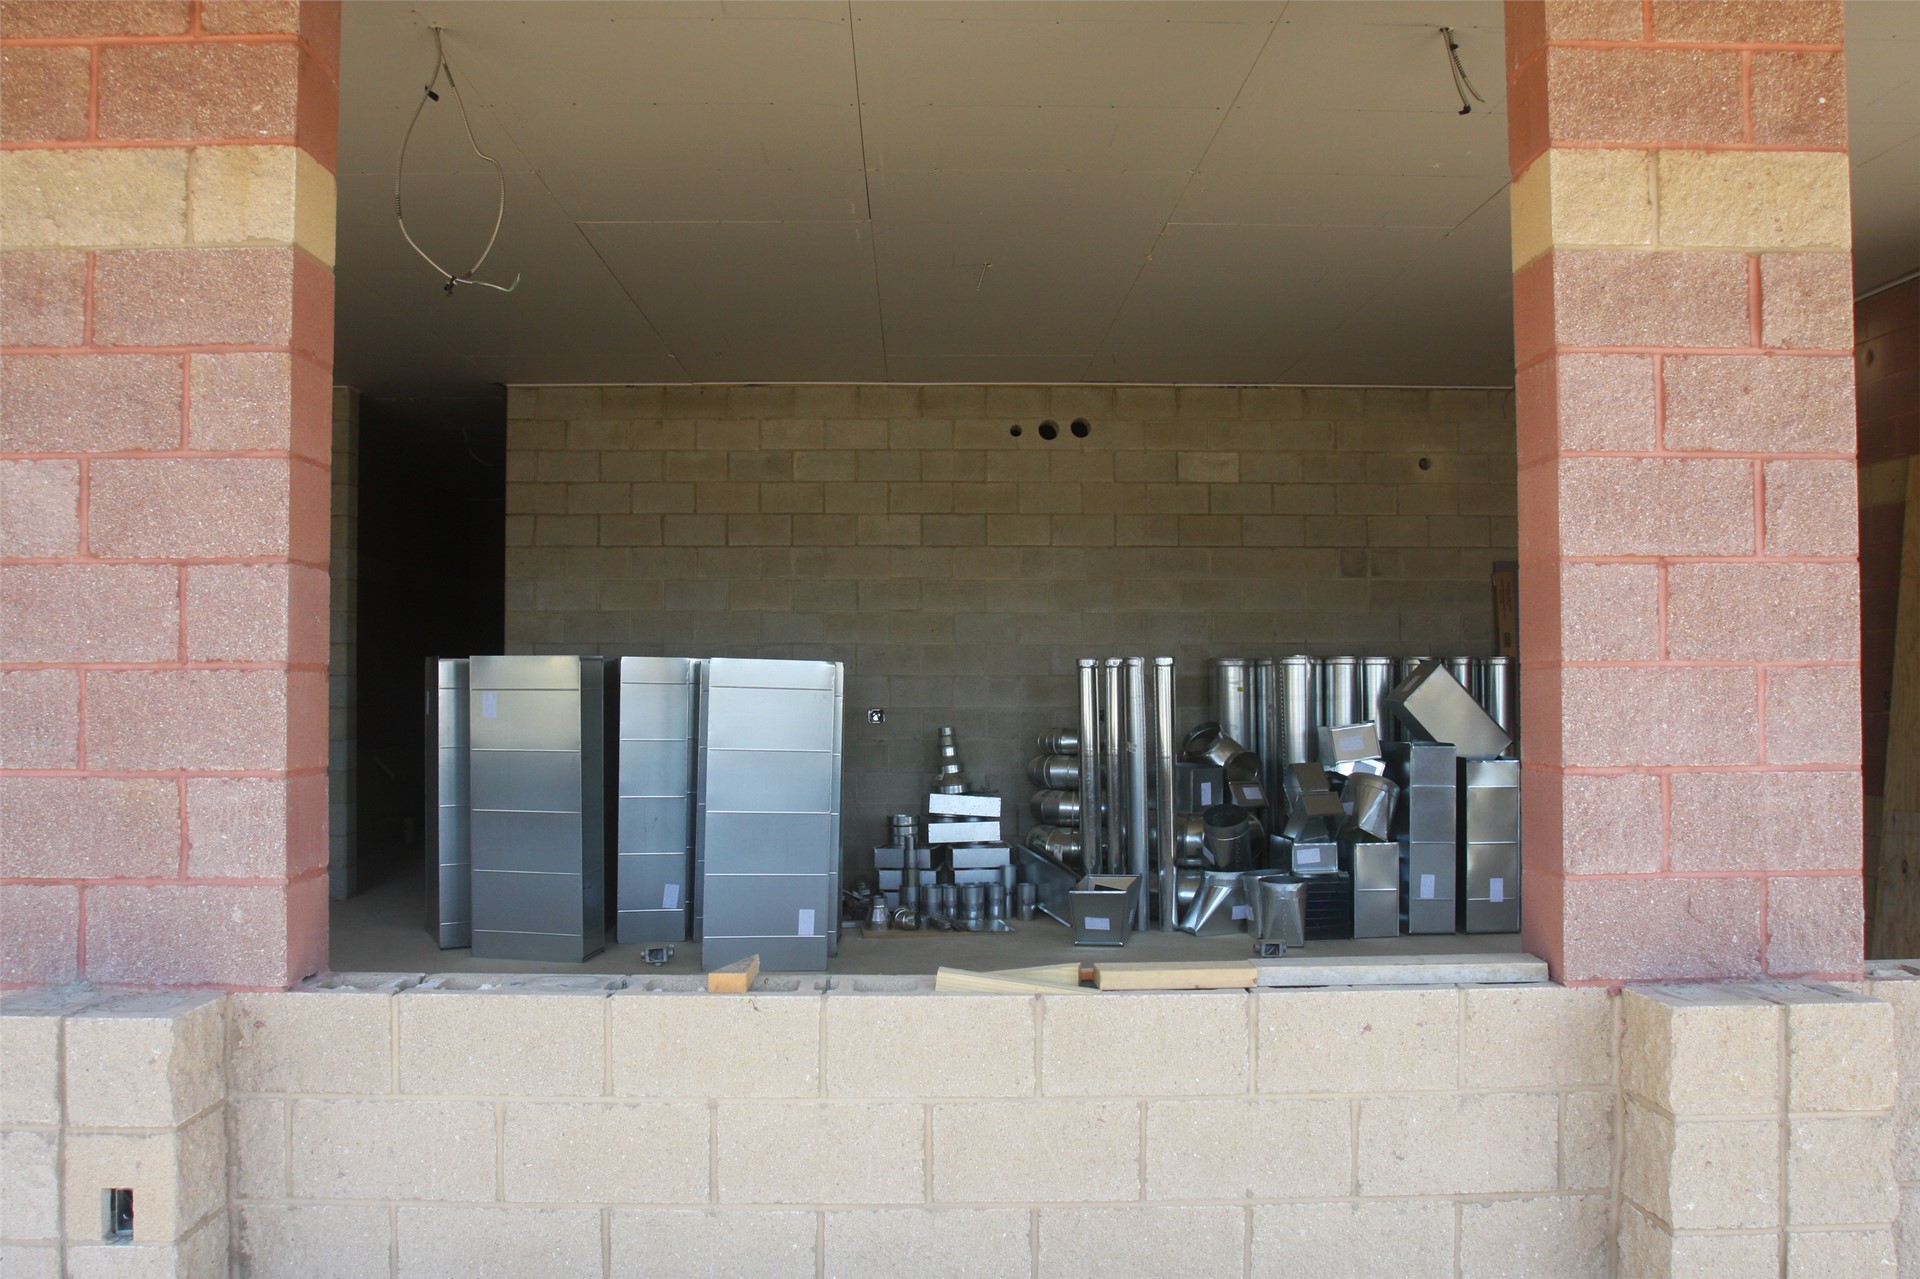 The center window of the concession stand